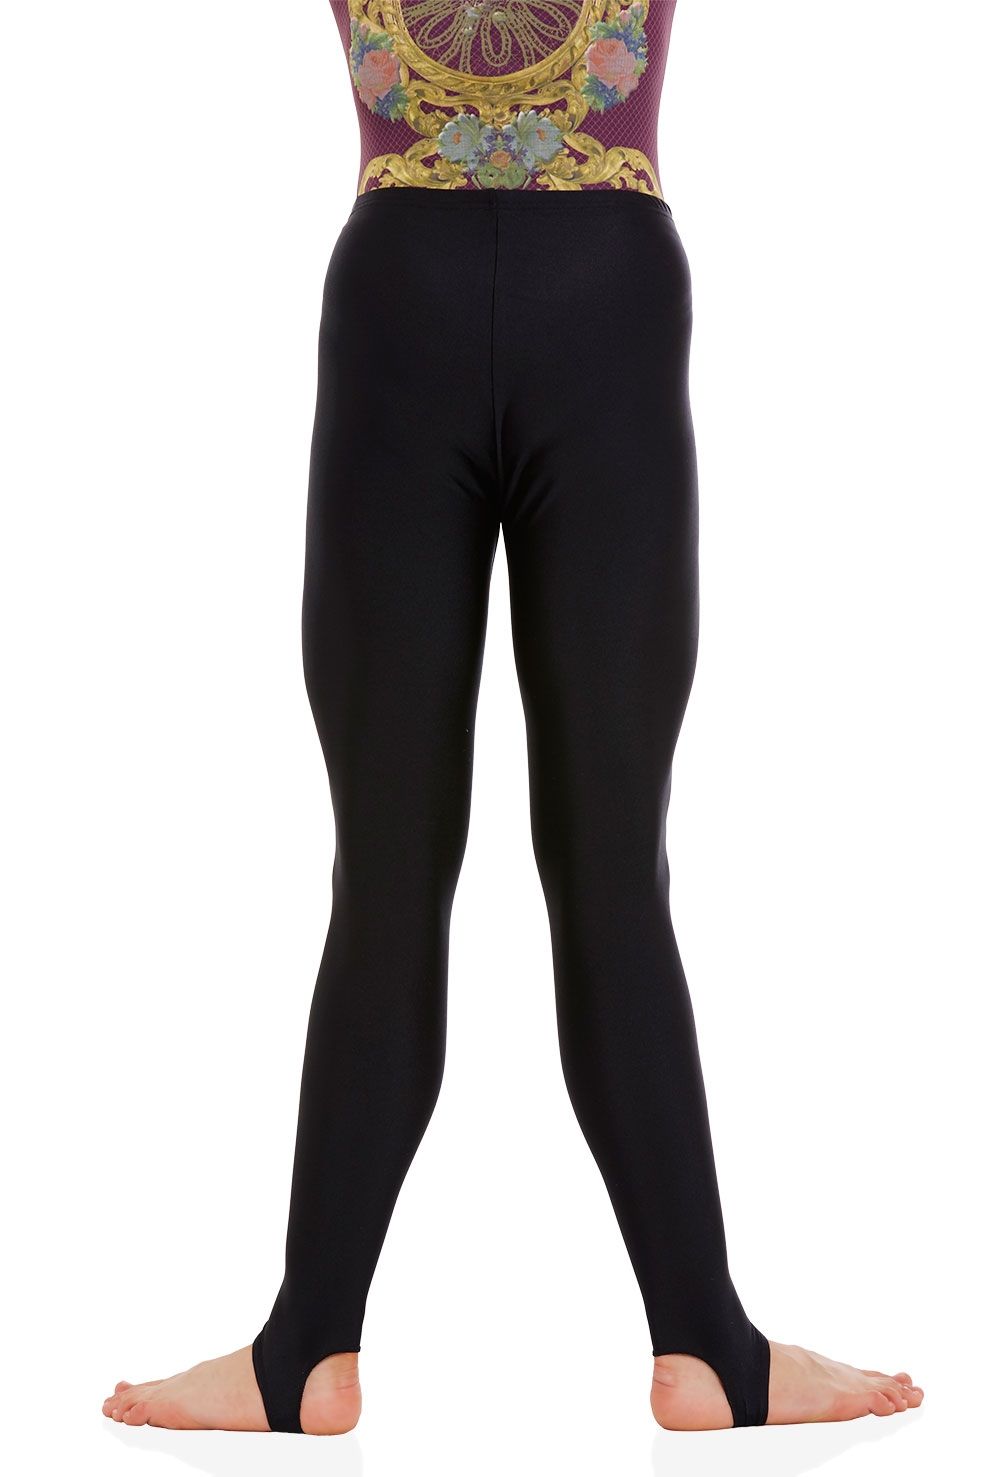 Lycra Tights W/Stirrups - SIZE: X-Small, COLOR: Navy